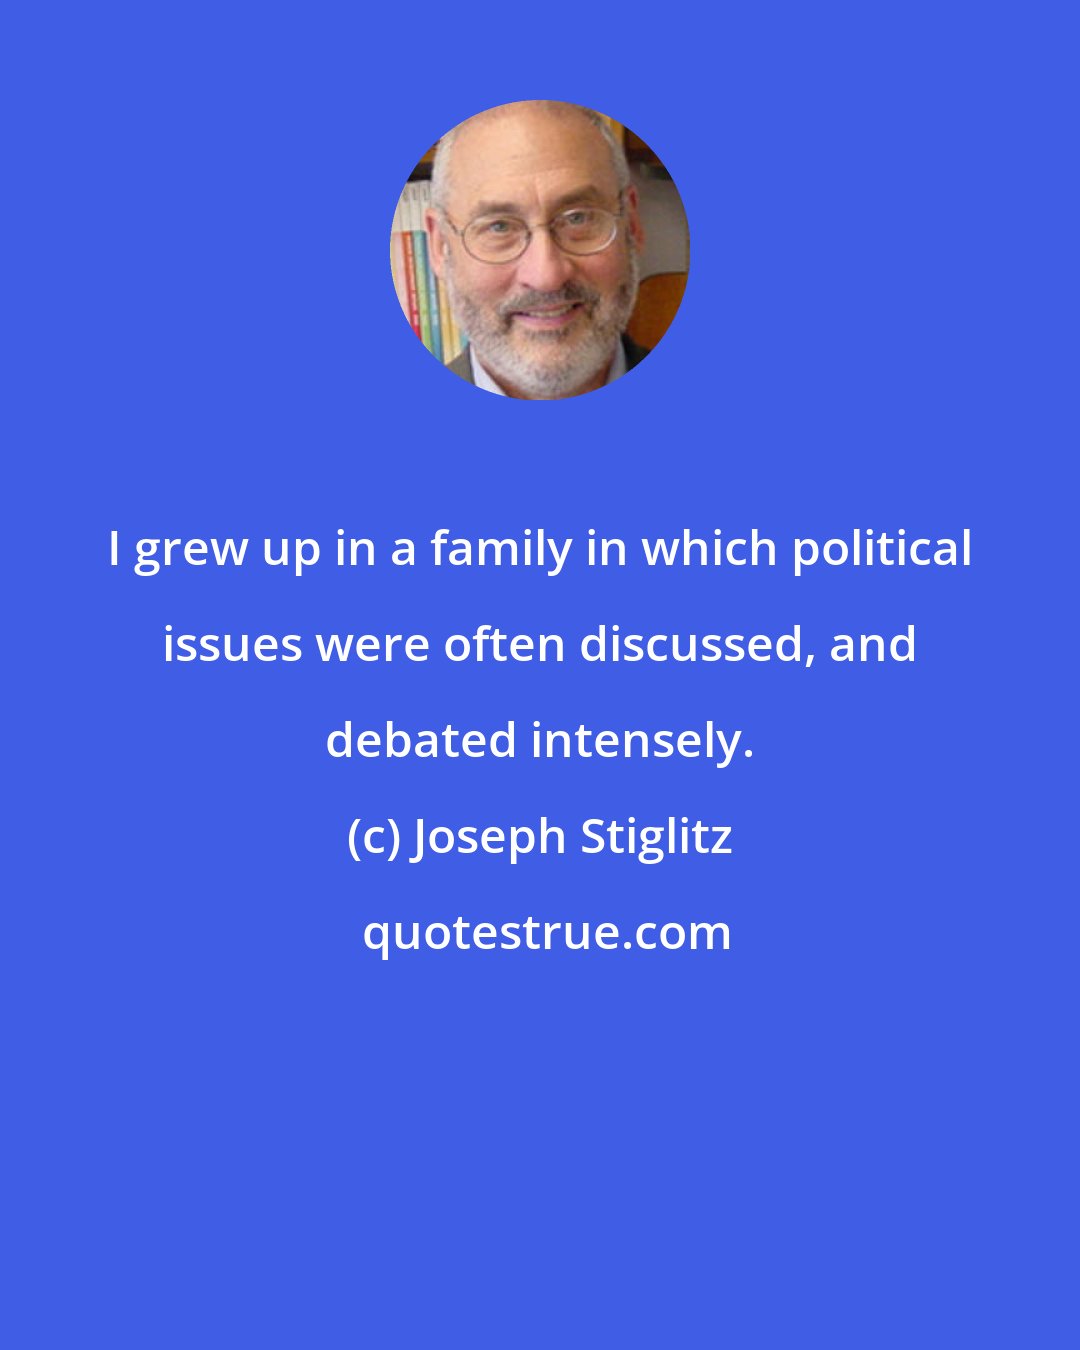 Joseph Stiglitz: I grew up in a family in which political issues were often discussed, and debated intensely.